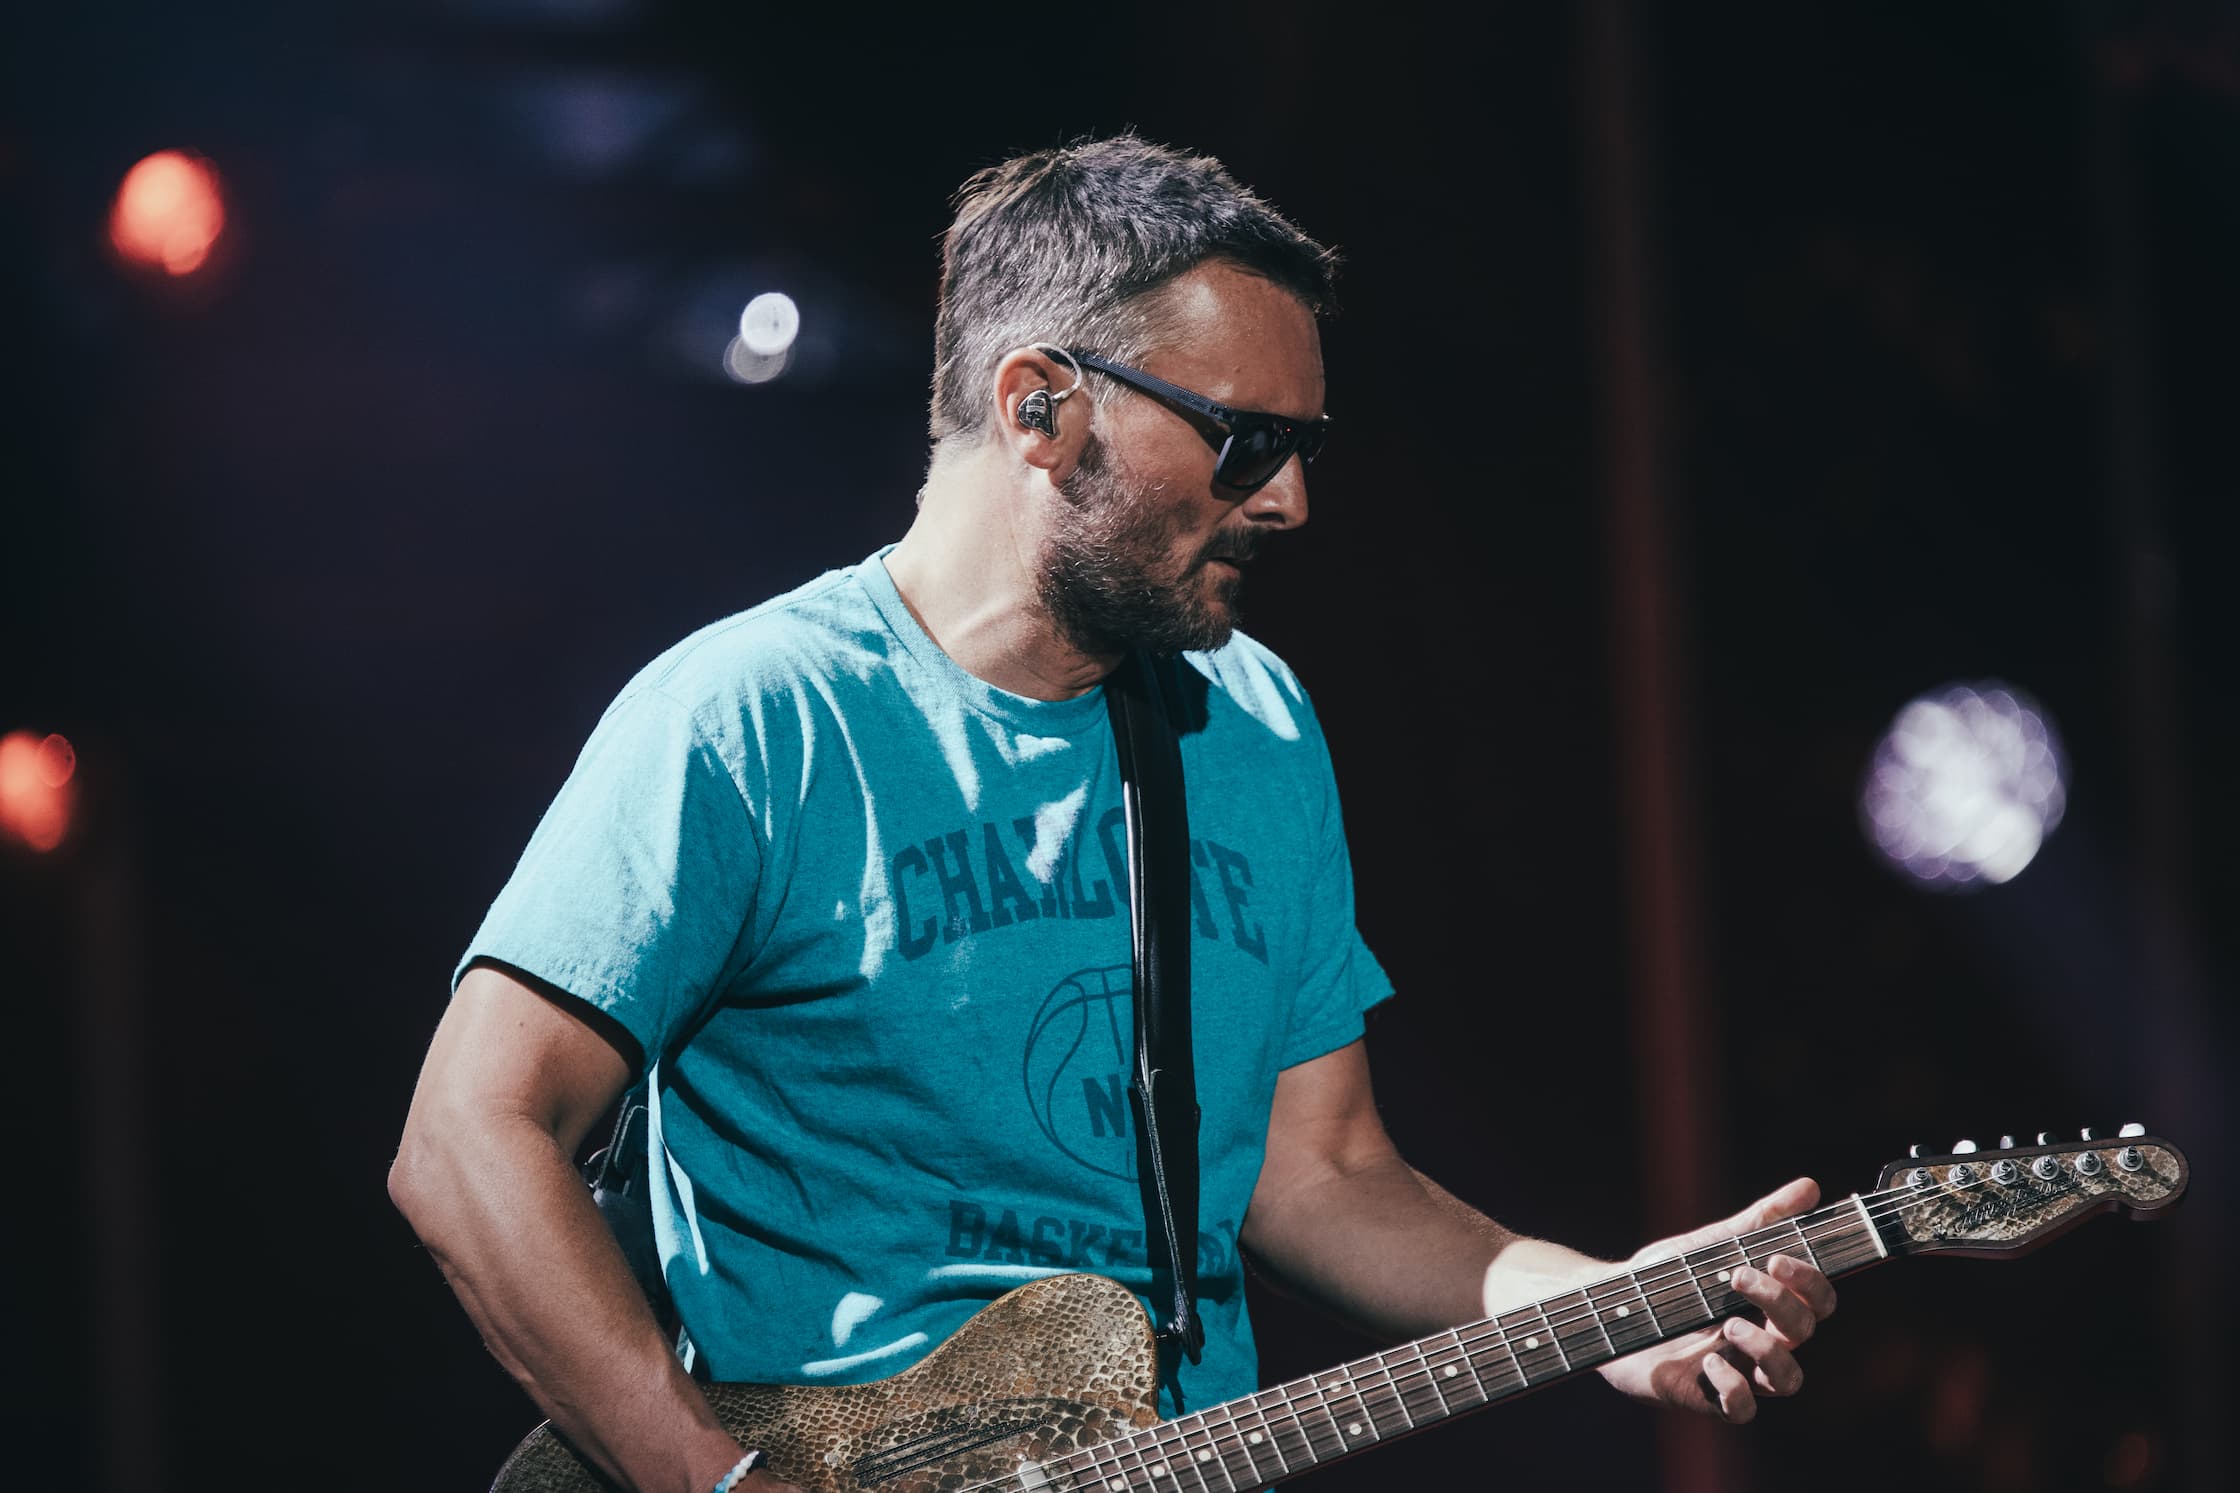 Eric Church at CMA Fest 2023 by Laura Ord